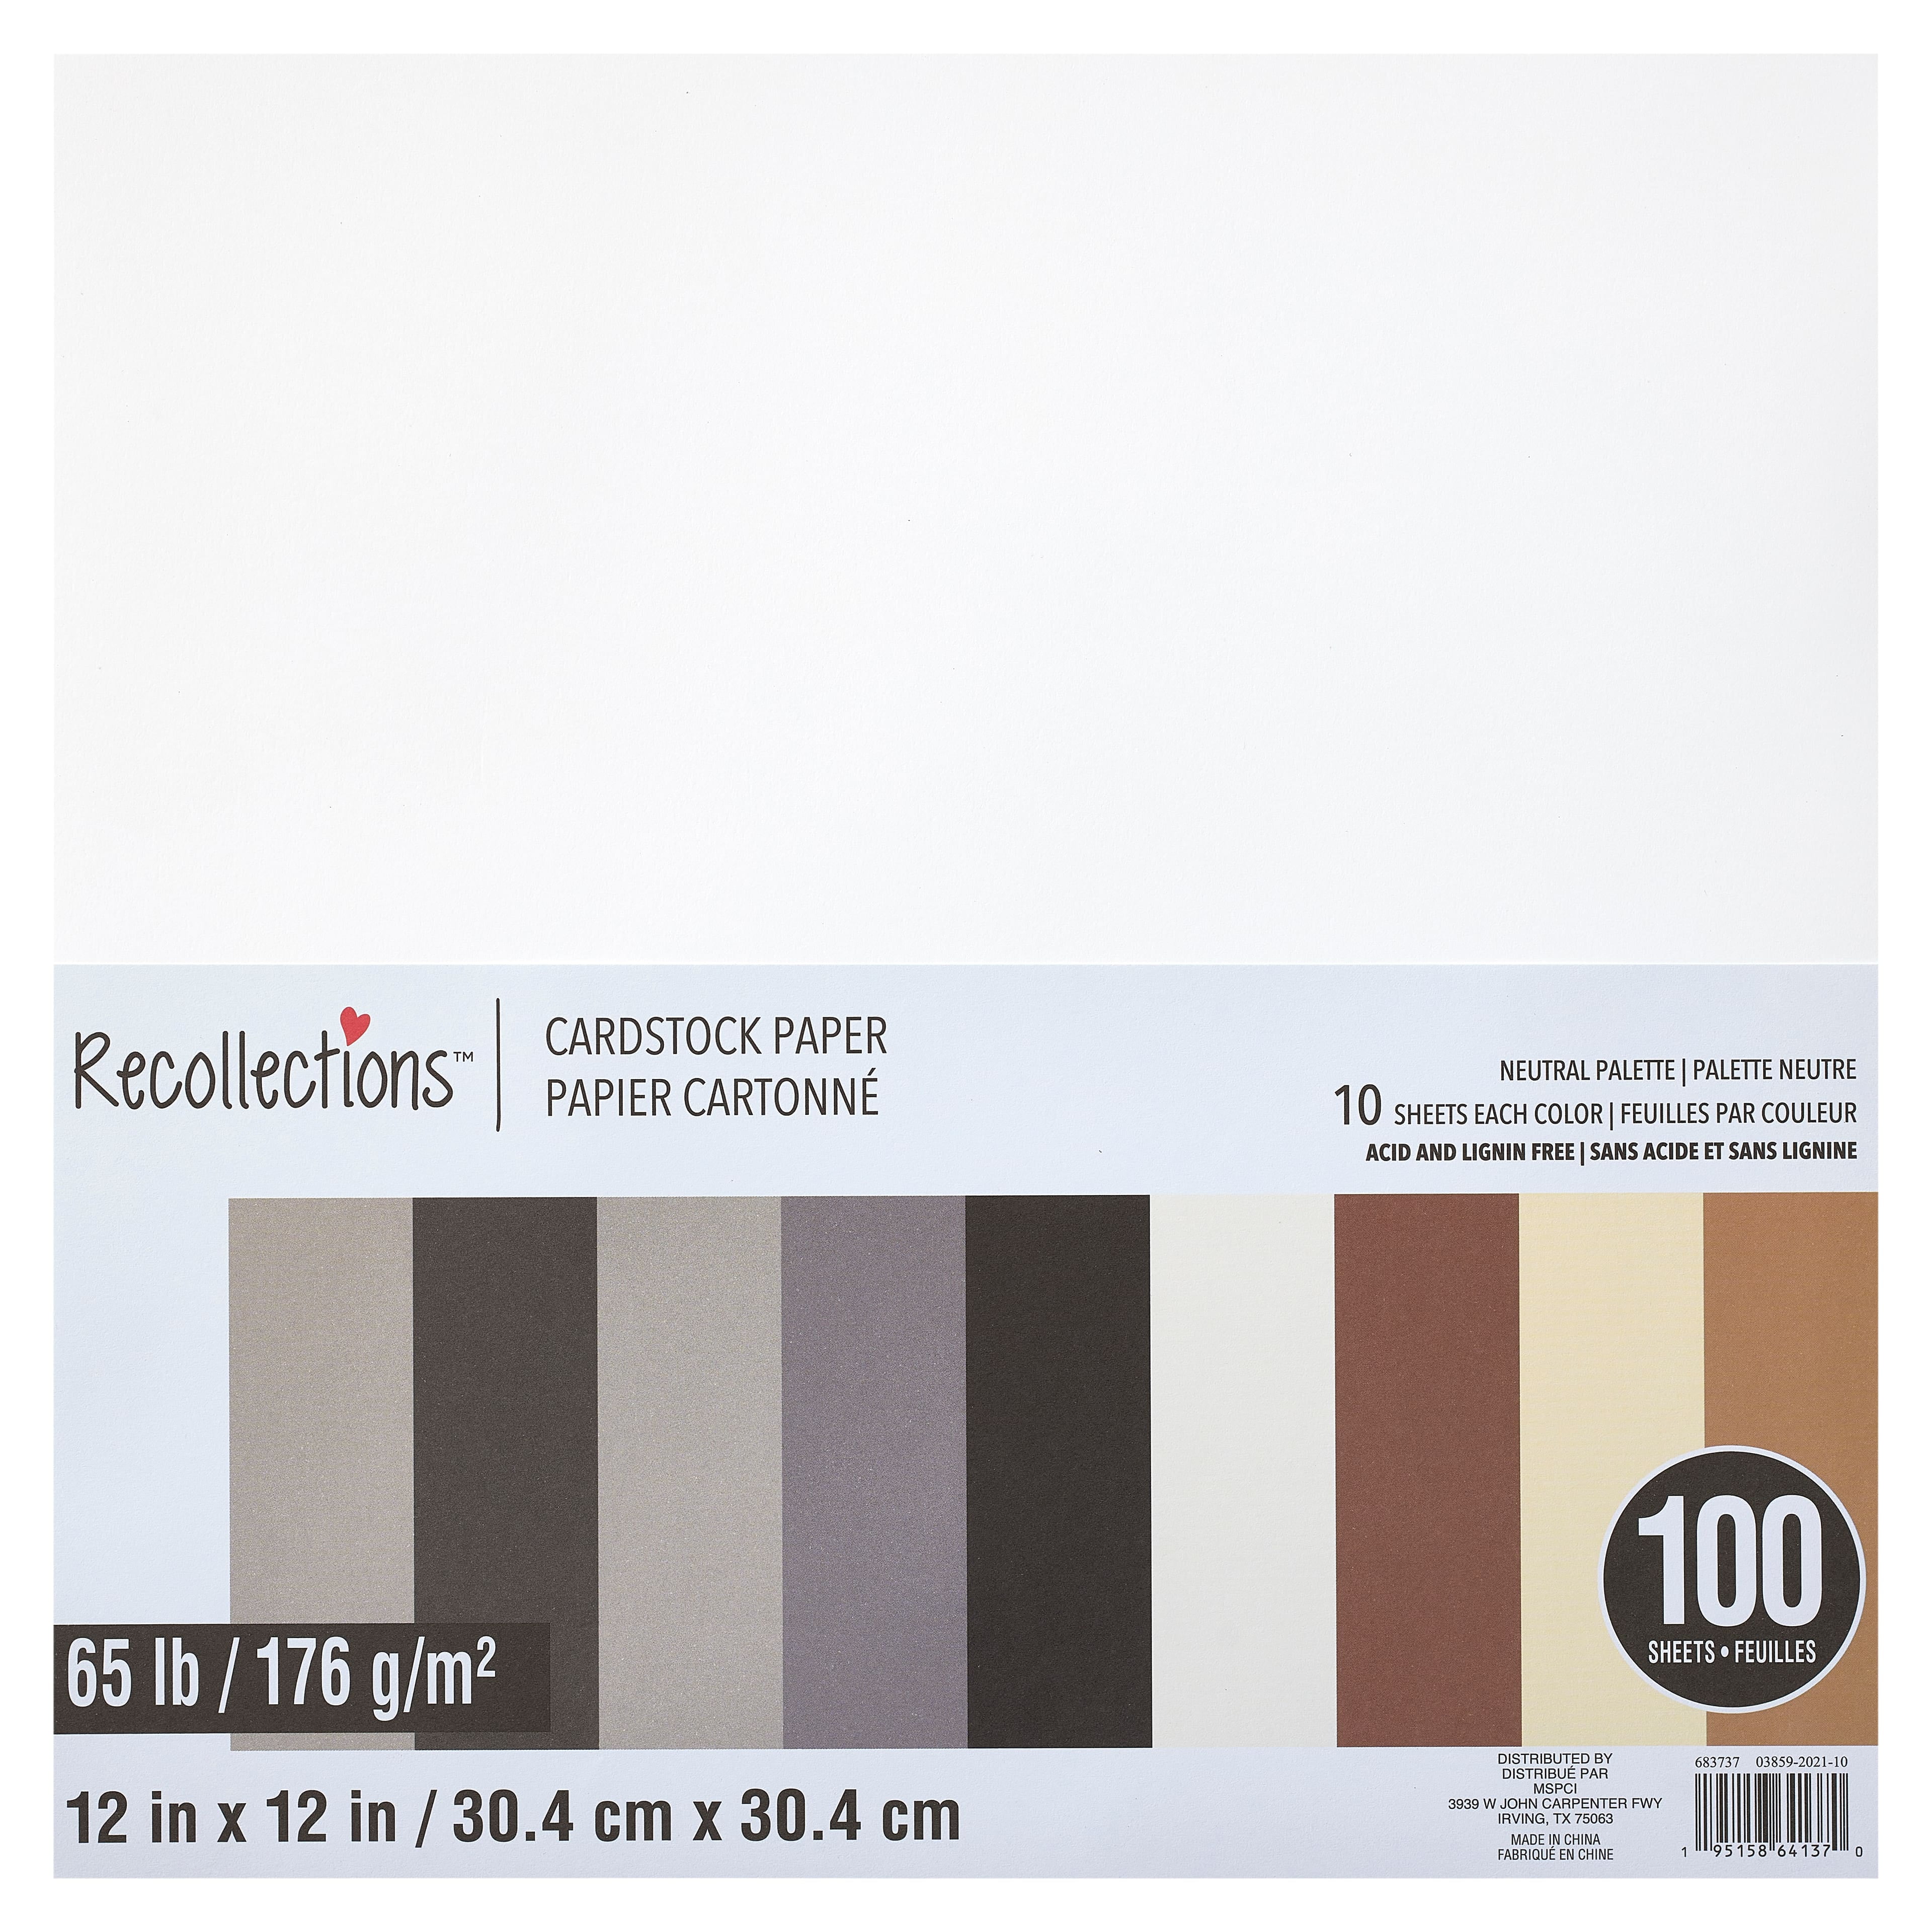 Recollections Black Shimmer 8.5 x 11 Cardstock Paper - 100 ct